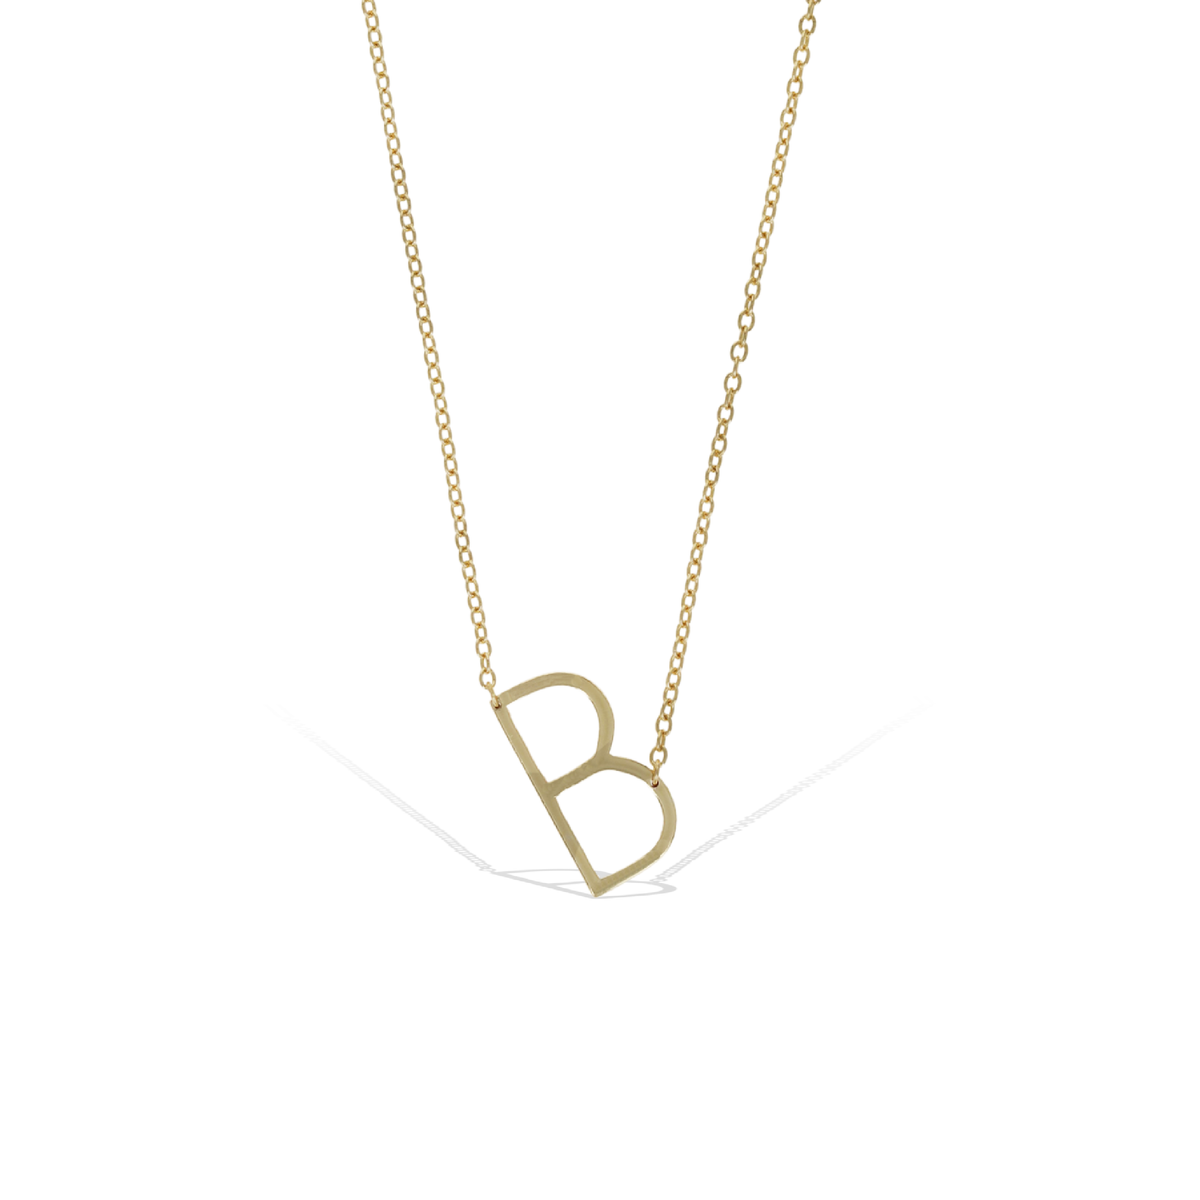 Alexandra Marks Jewelry Personalized Letter S Initial Necklace